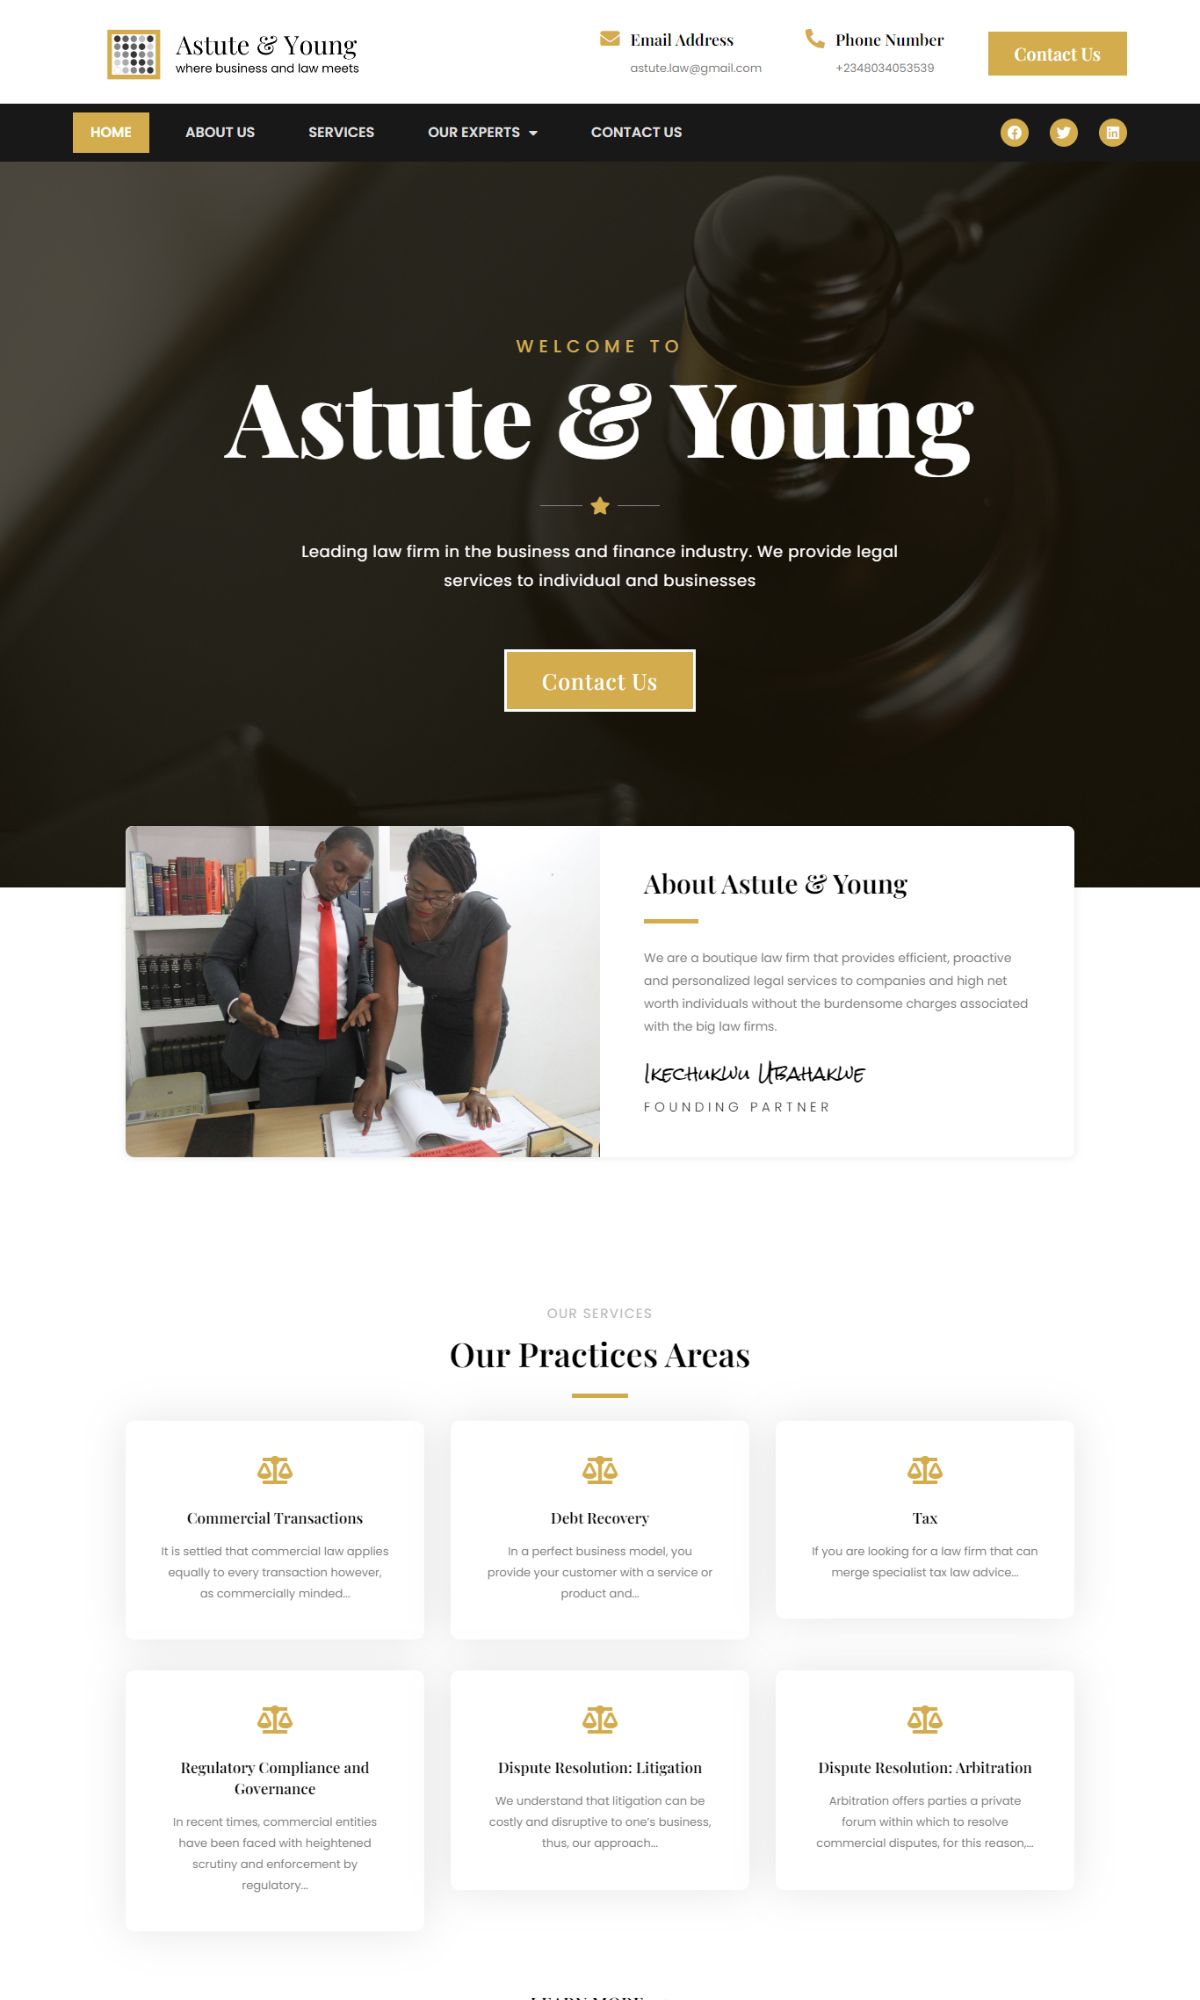 astute and young